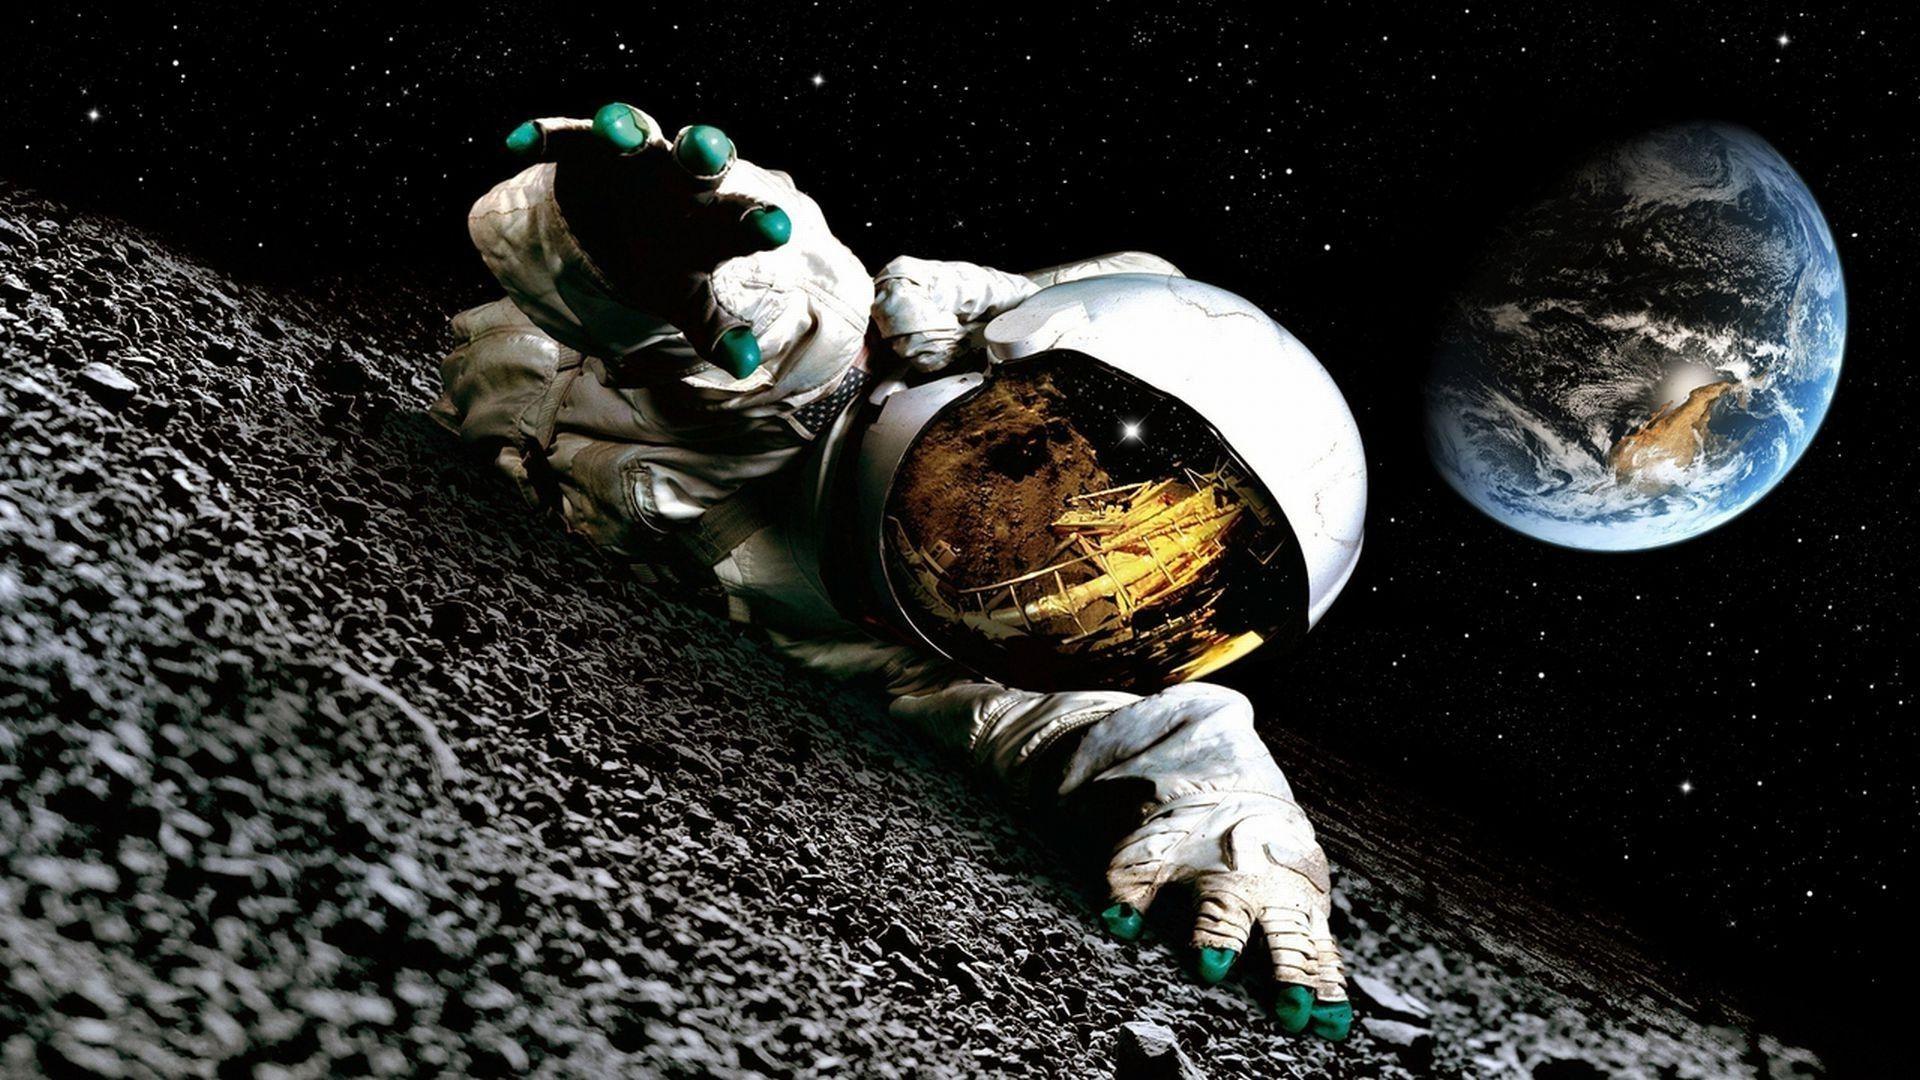 Cool space pics. Astronauts on the moon, Astronaut, Space picture